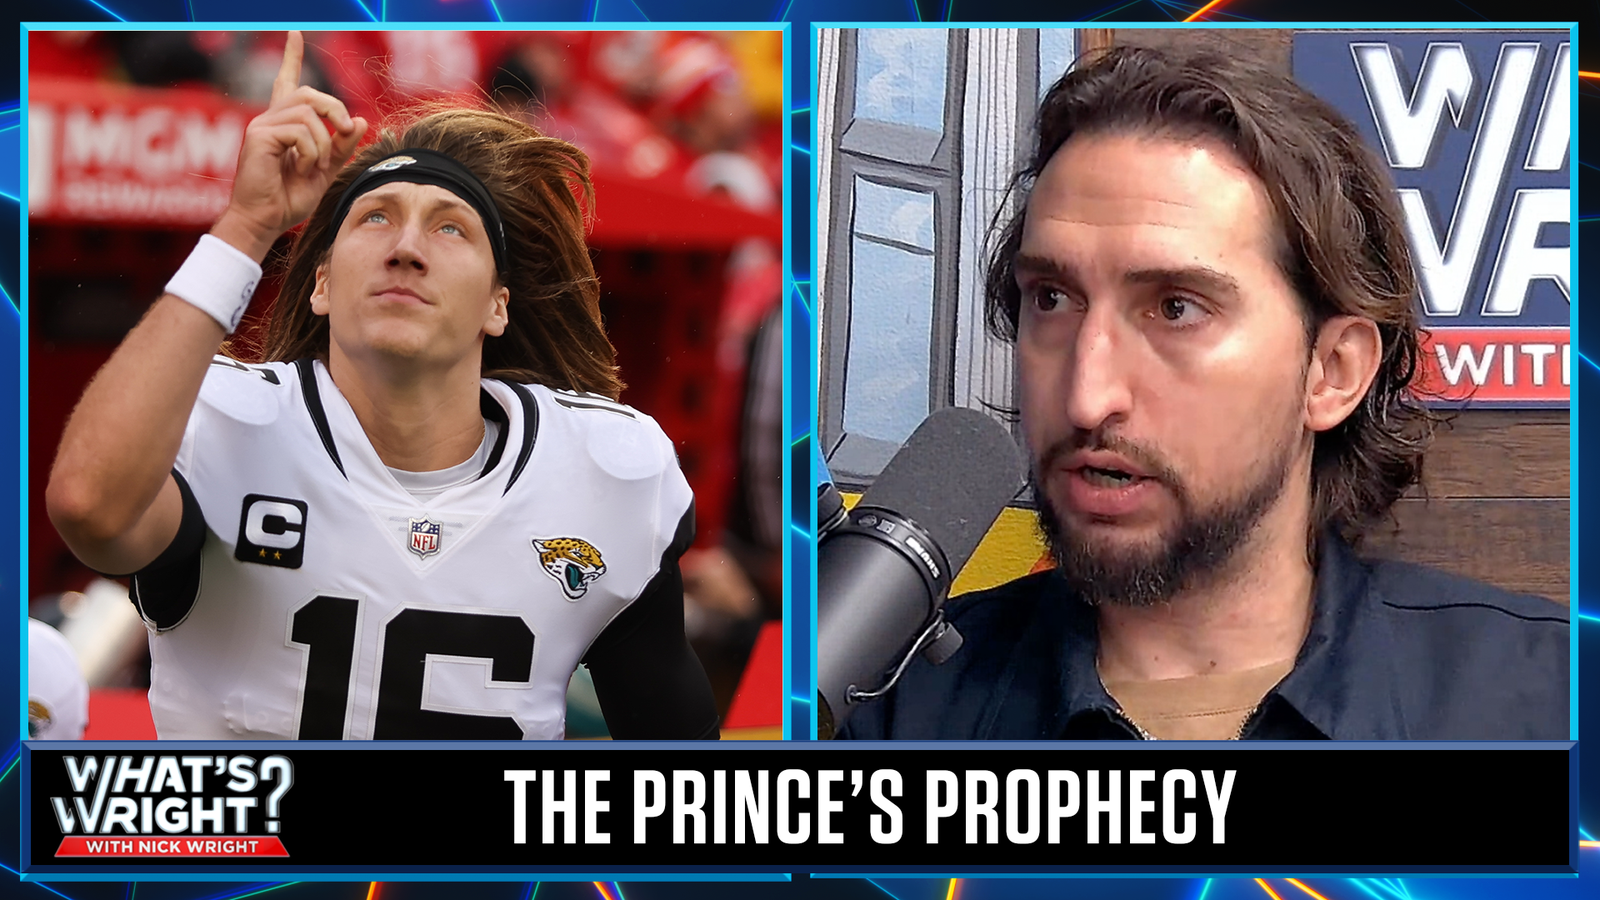 Nick Wright foresees a Super Bowl appearance for Trevor Lawrence